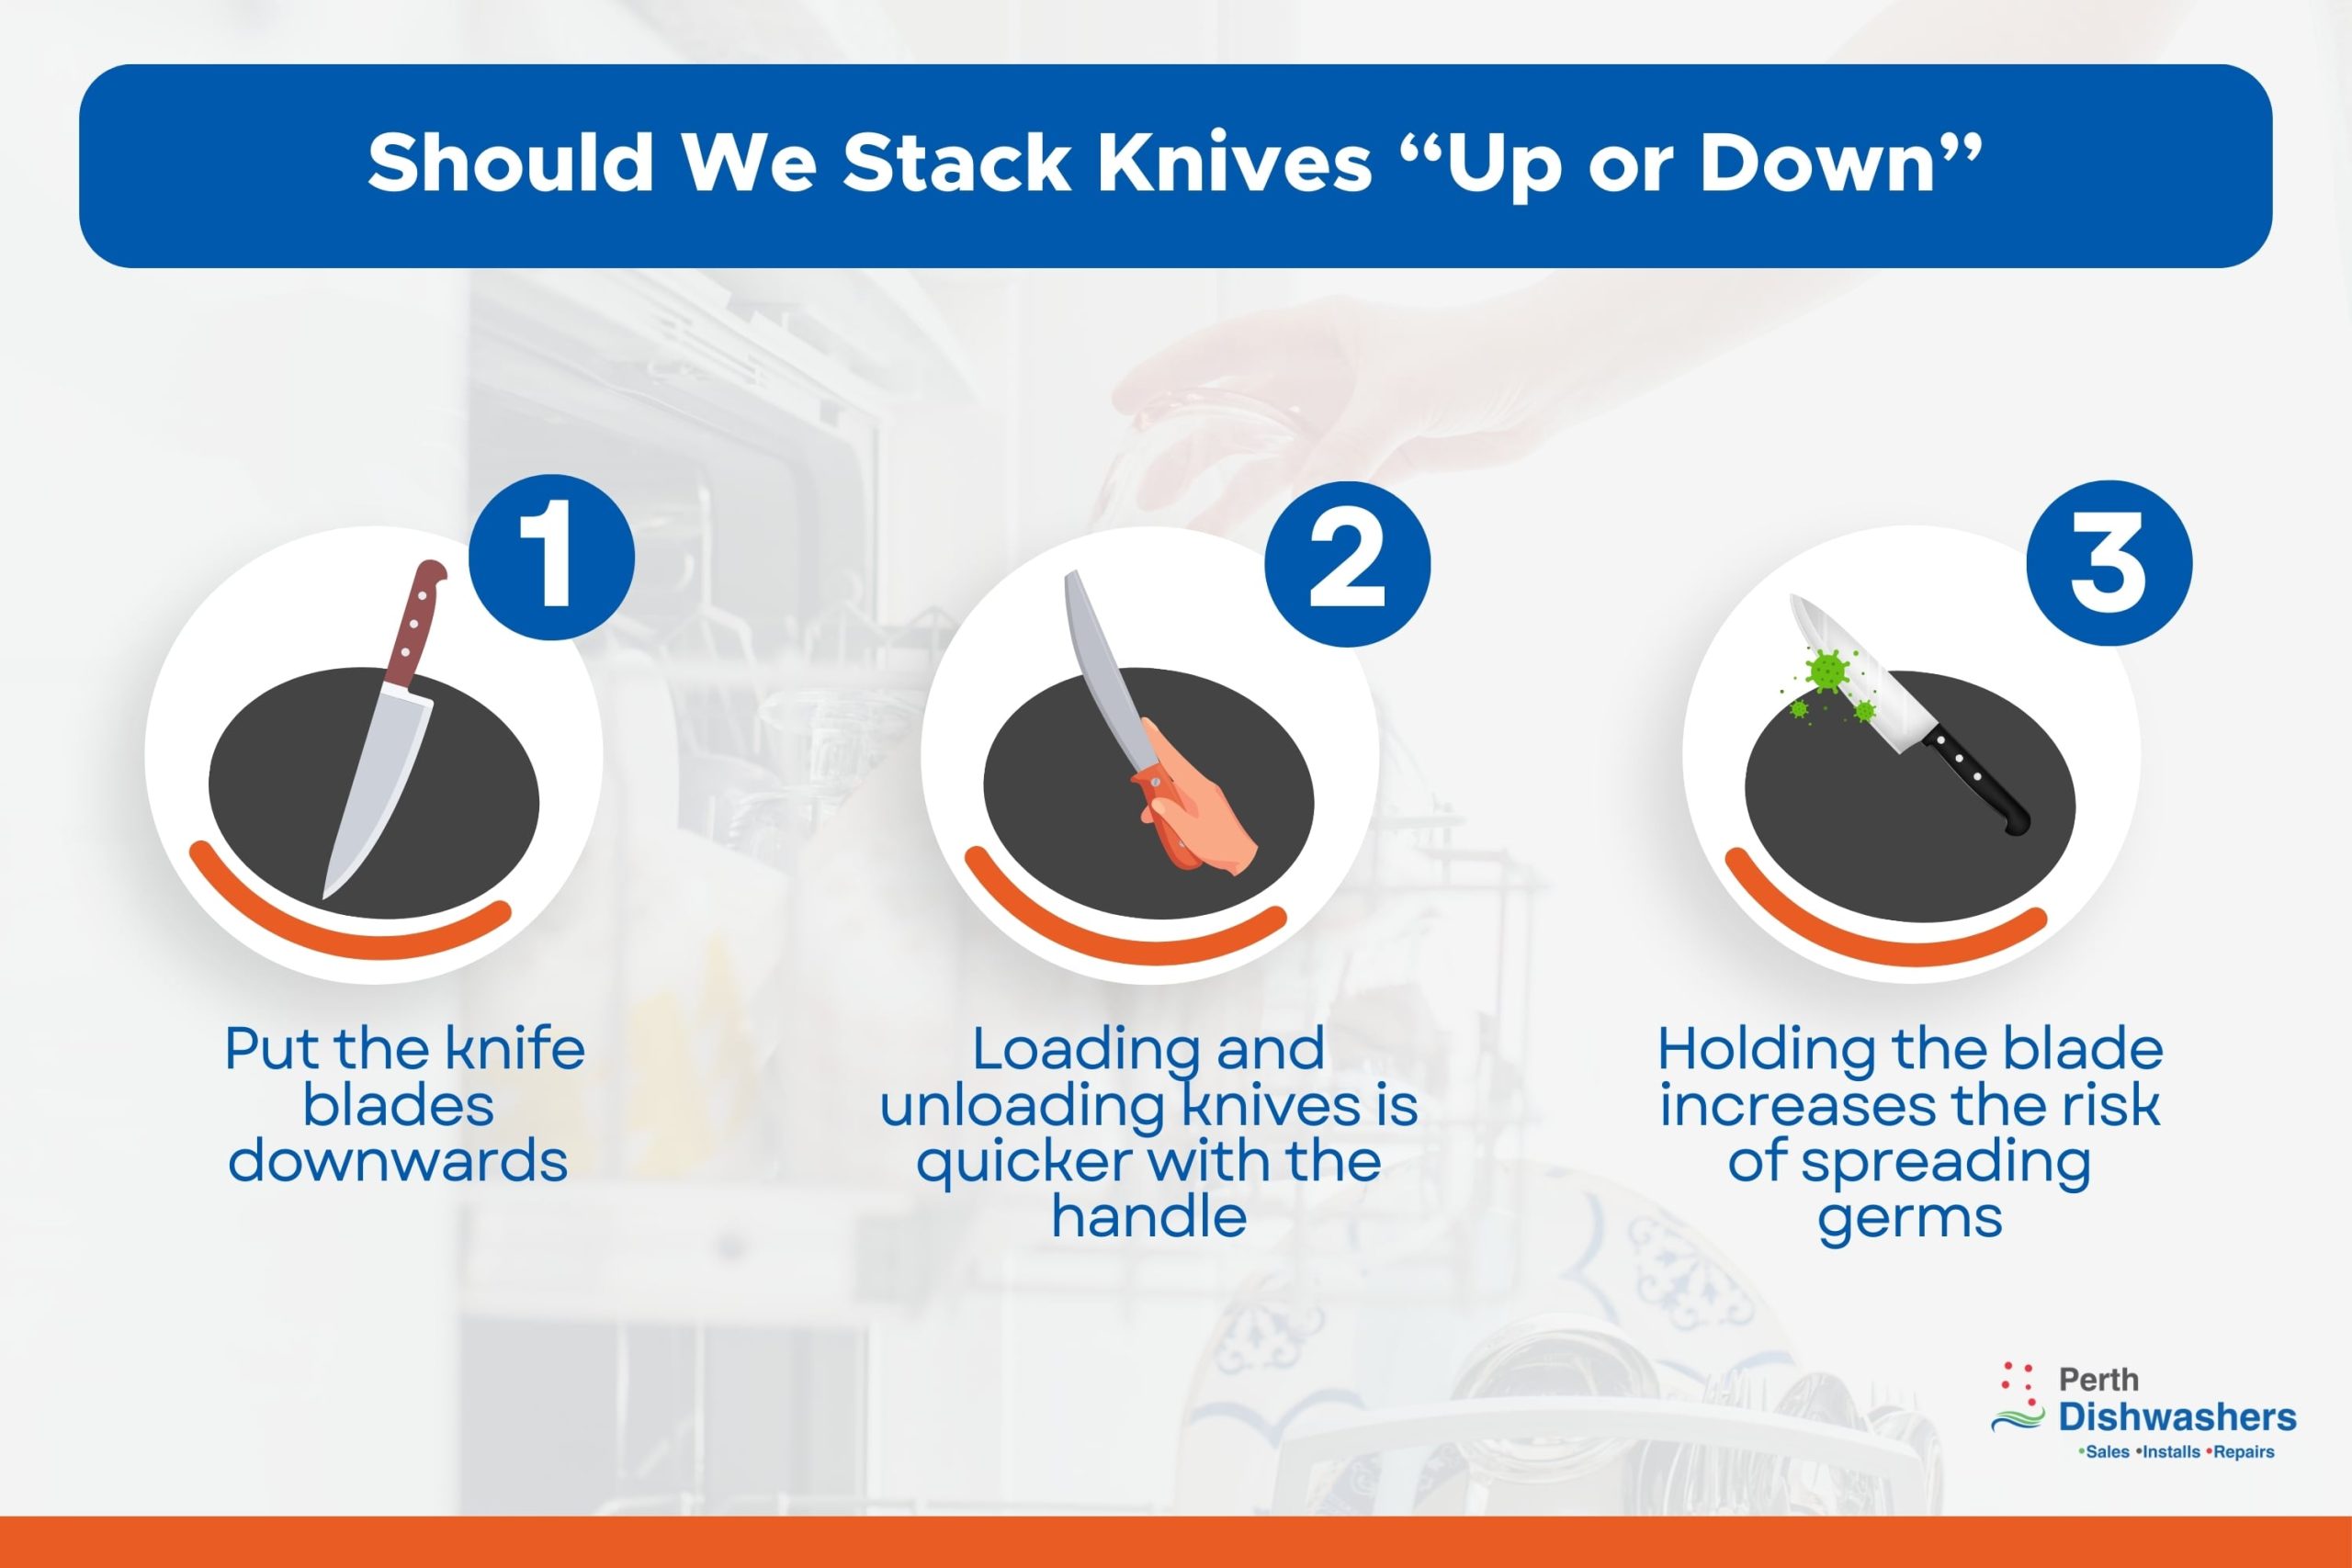 should we stack knives “up or down” 2